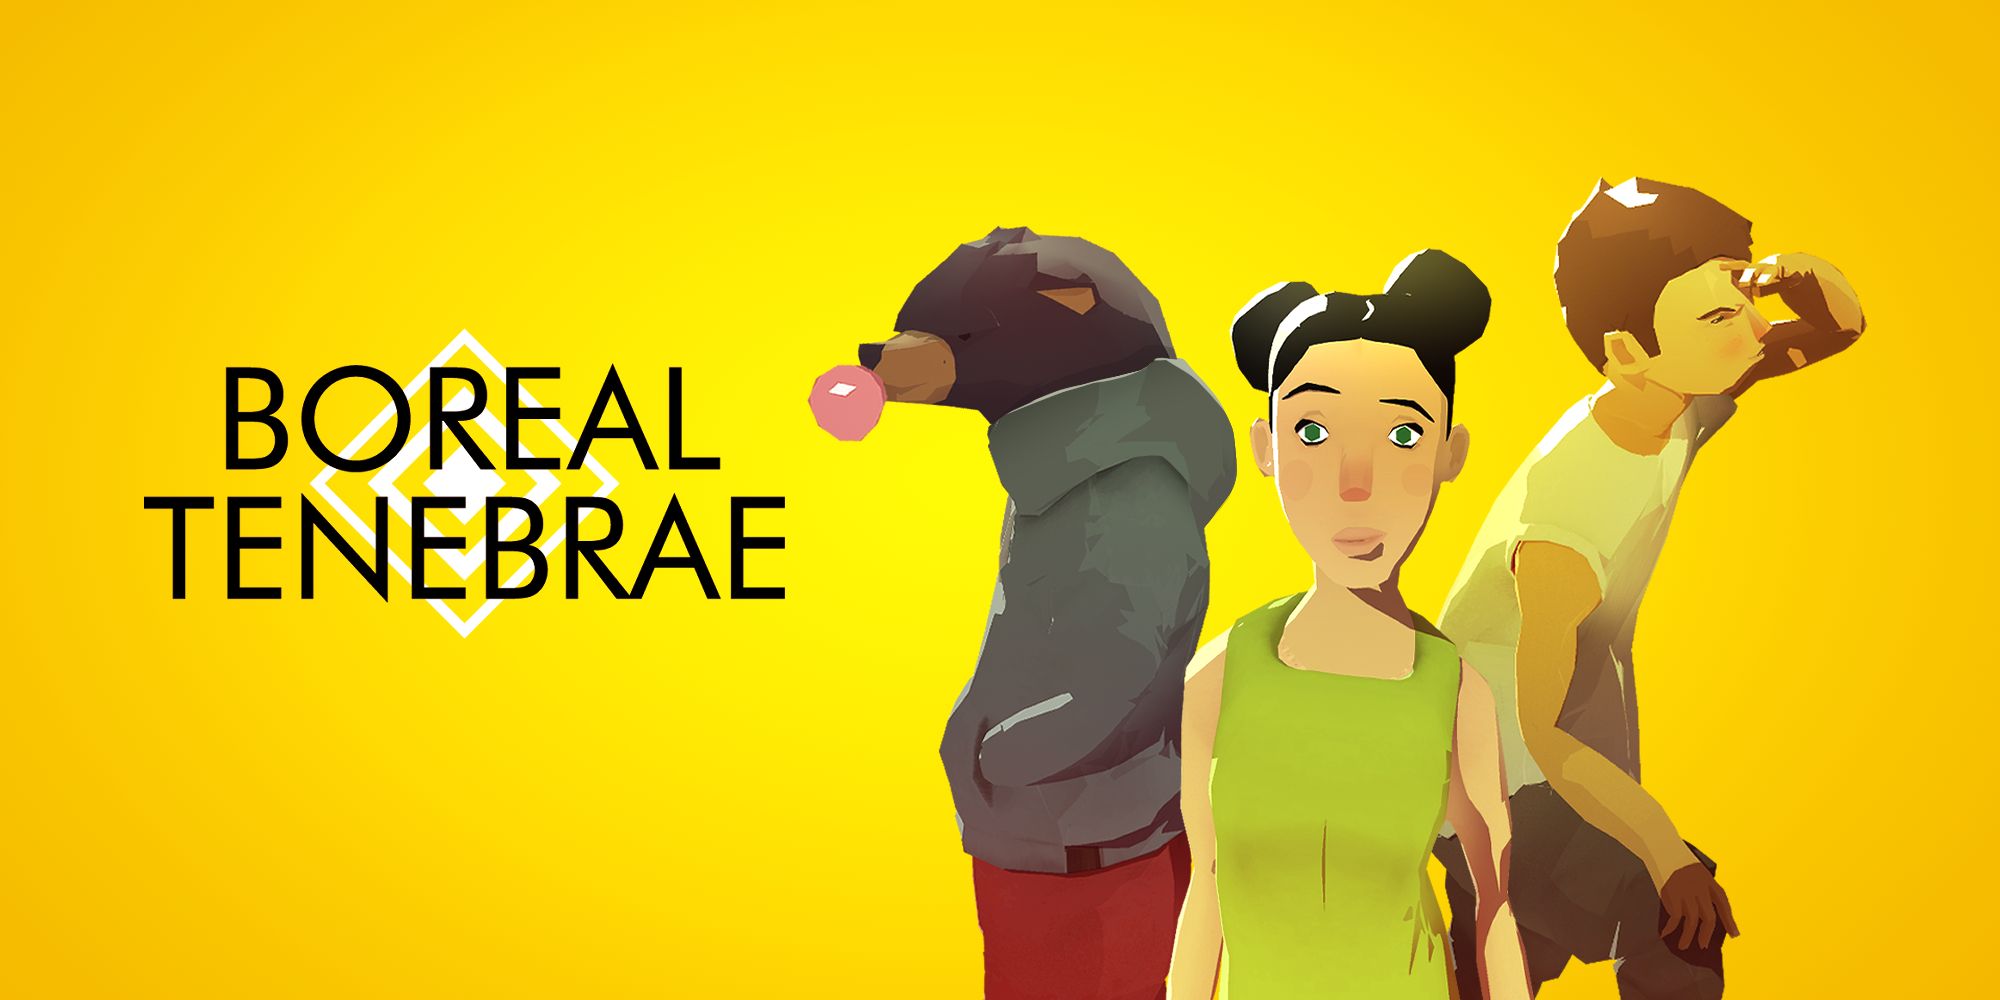 the cover image for Boreal Tenebrae featuring a trio of characters from the game including Bree on the right and the game's logo on the left against a yellow background